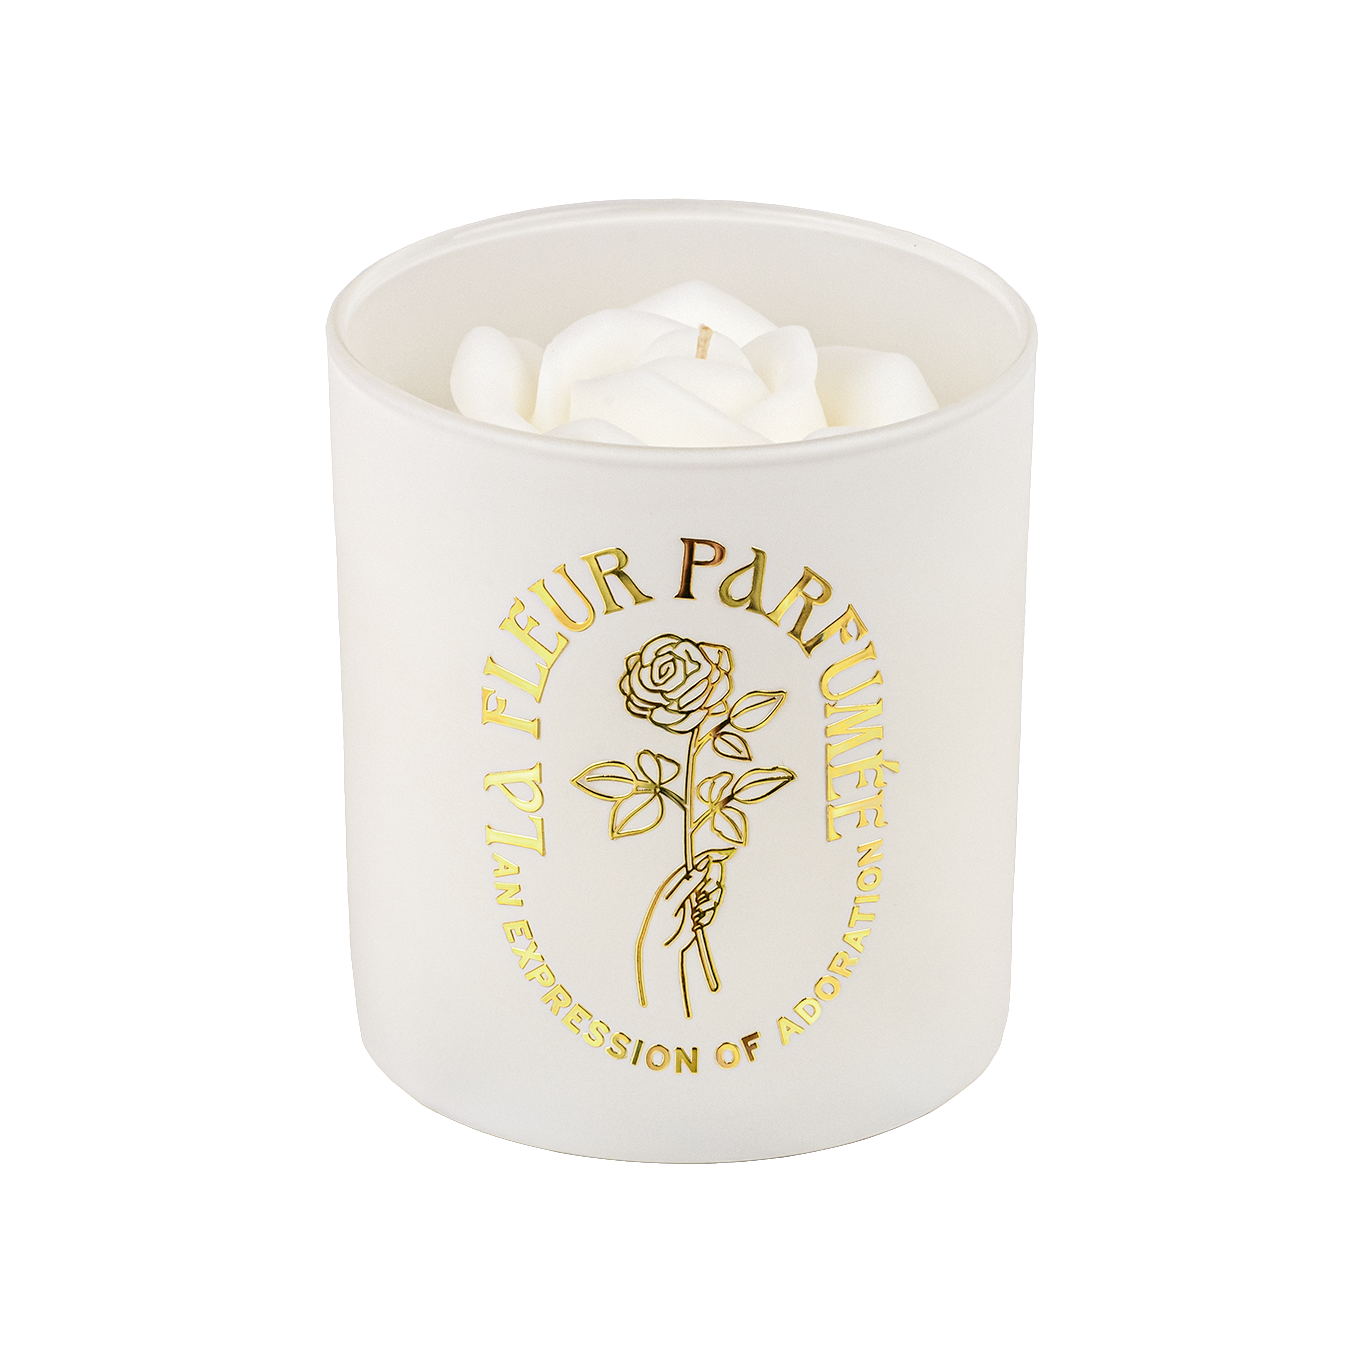 An elegant luxurious ivory white candle with a gold emblem that reads La Fleur Parfumée An Expression of Adoration, and is topped with an ivory white sculpted wax rose